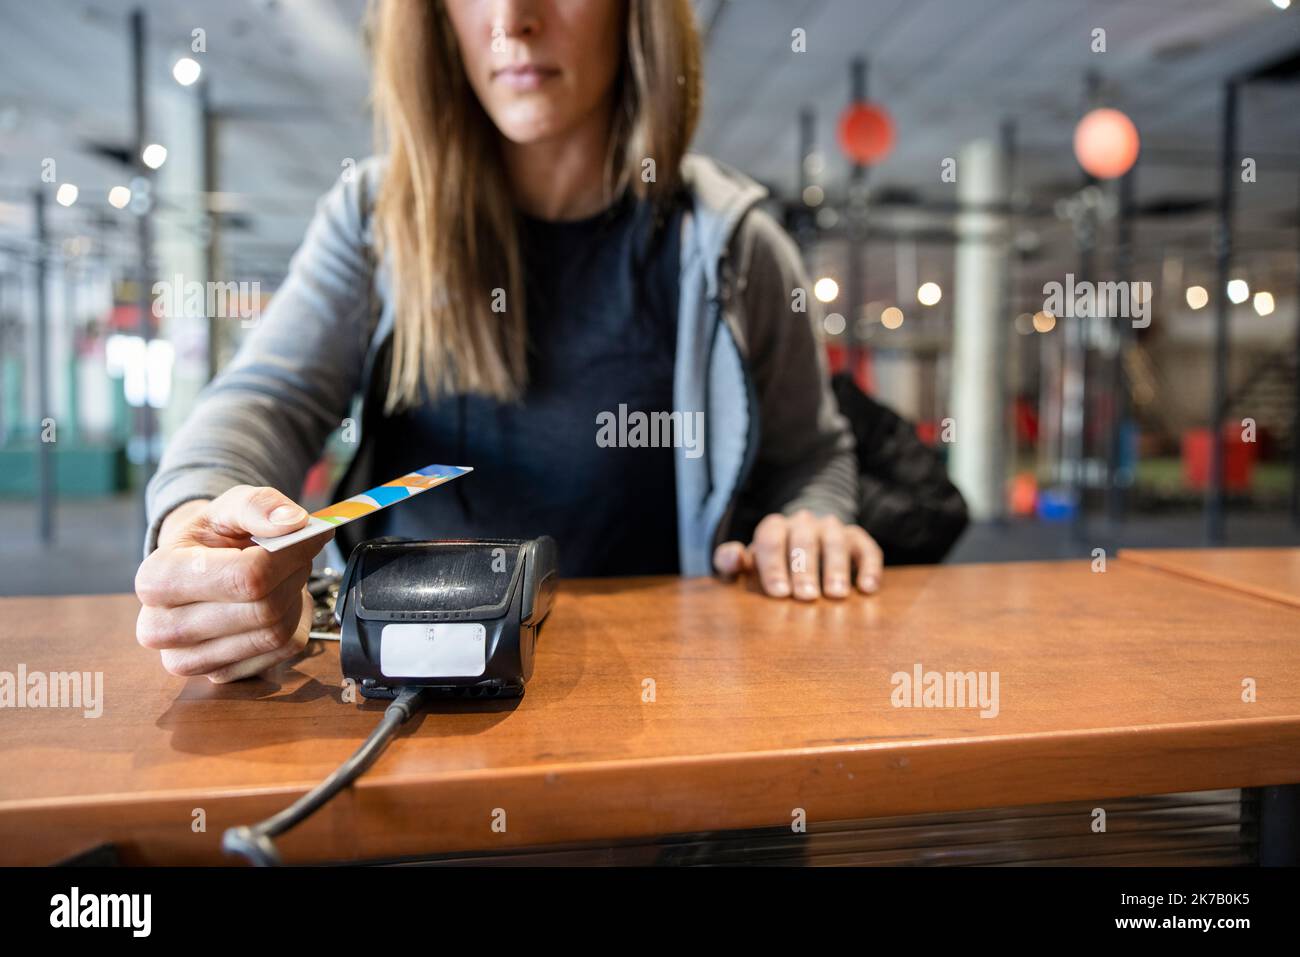 Close up woman paying for gym membership with smart card Stock Photo